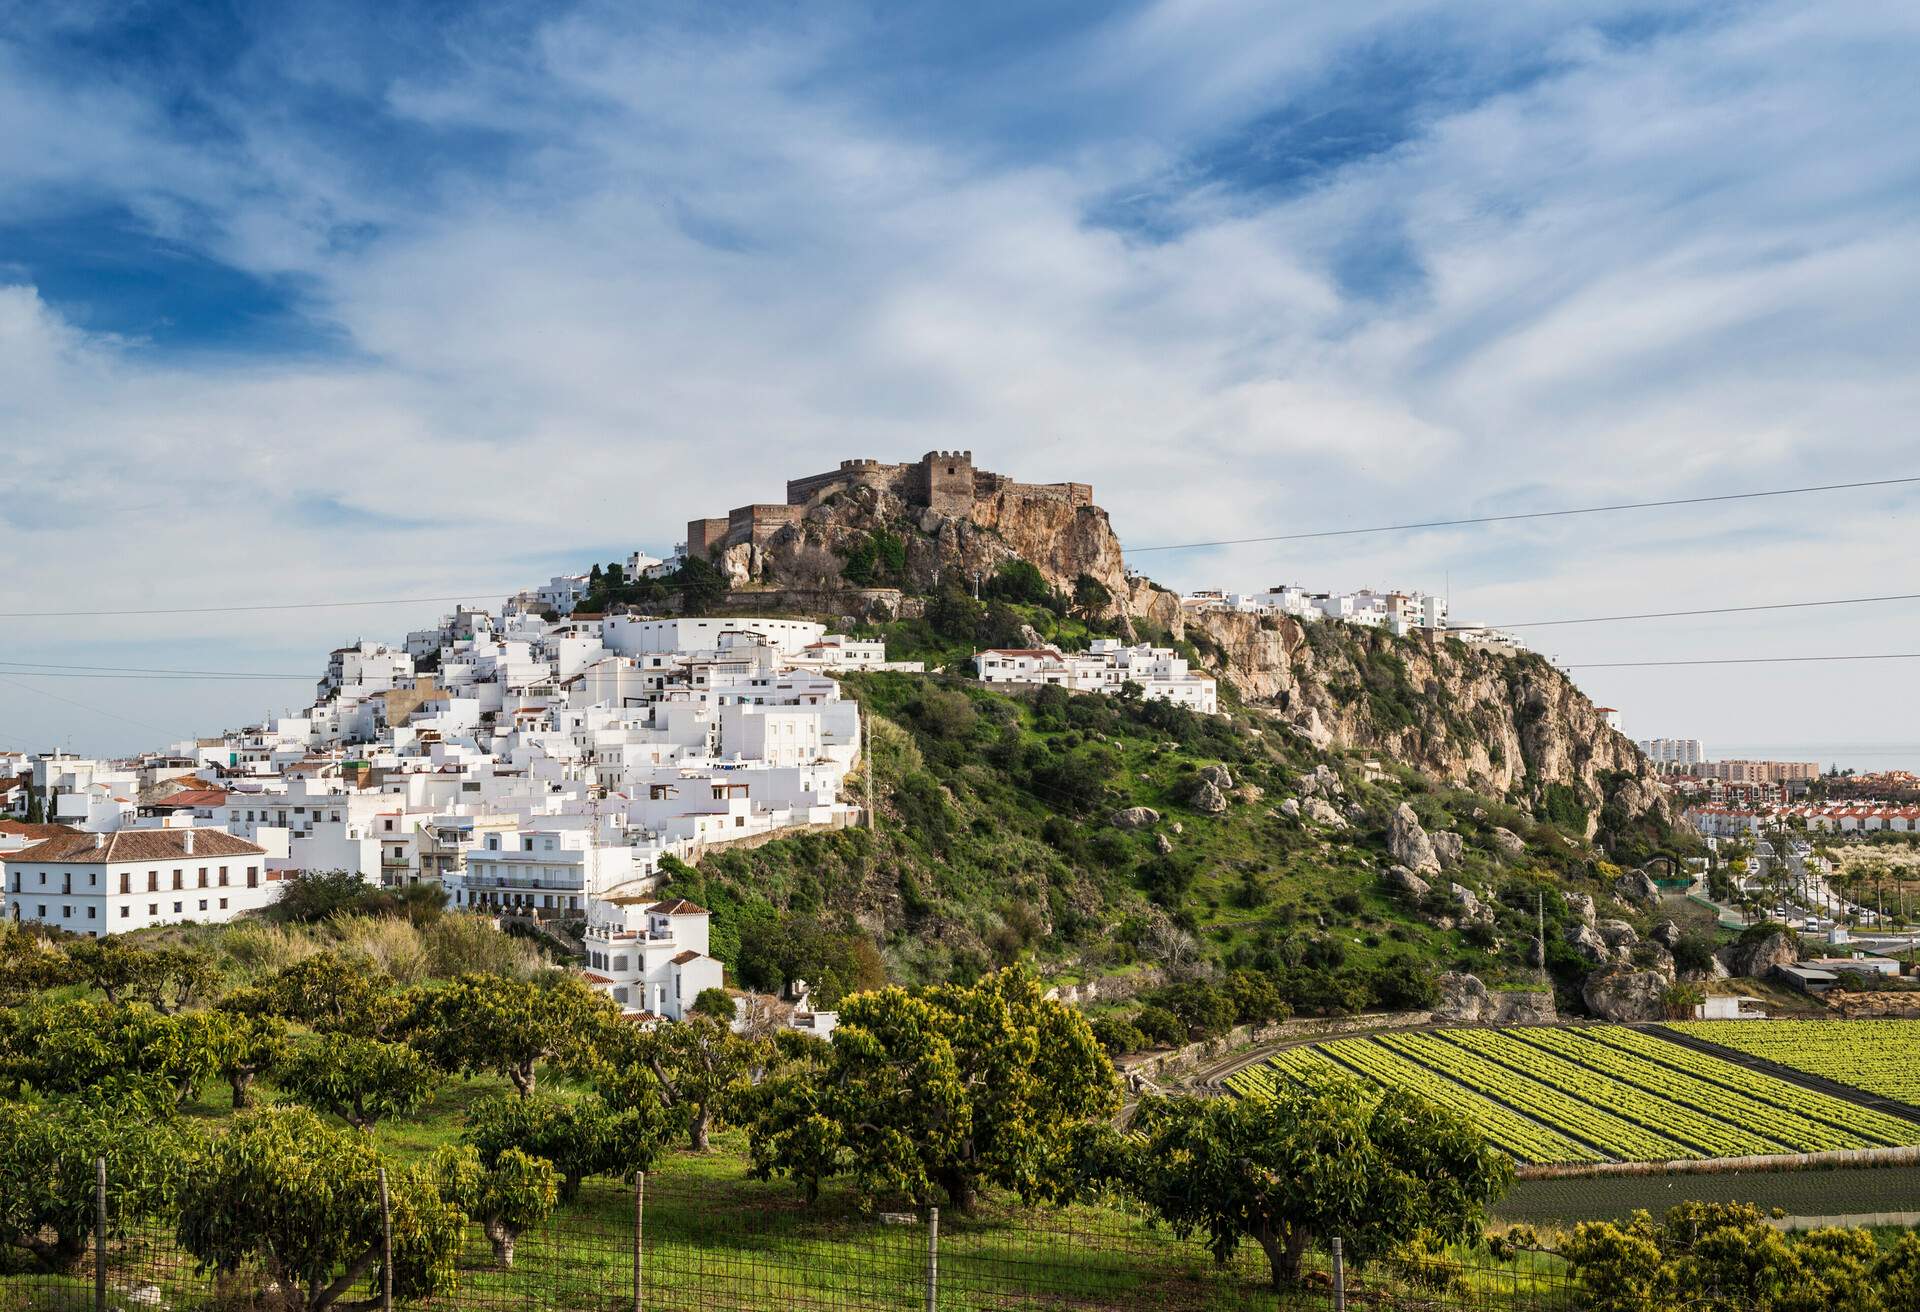 Panoramic view of Salobrena with the typical andalusia white houses and its medieval castle on a tophill